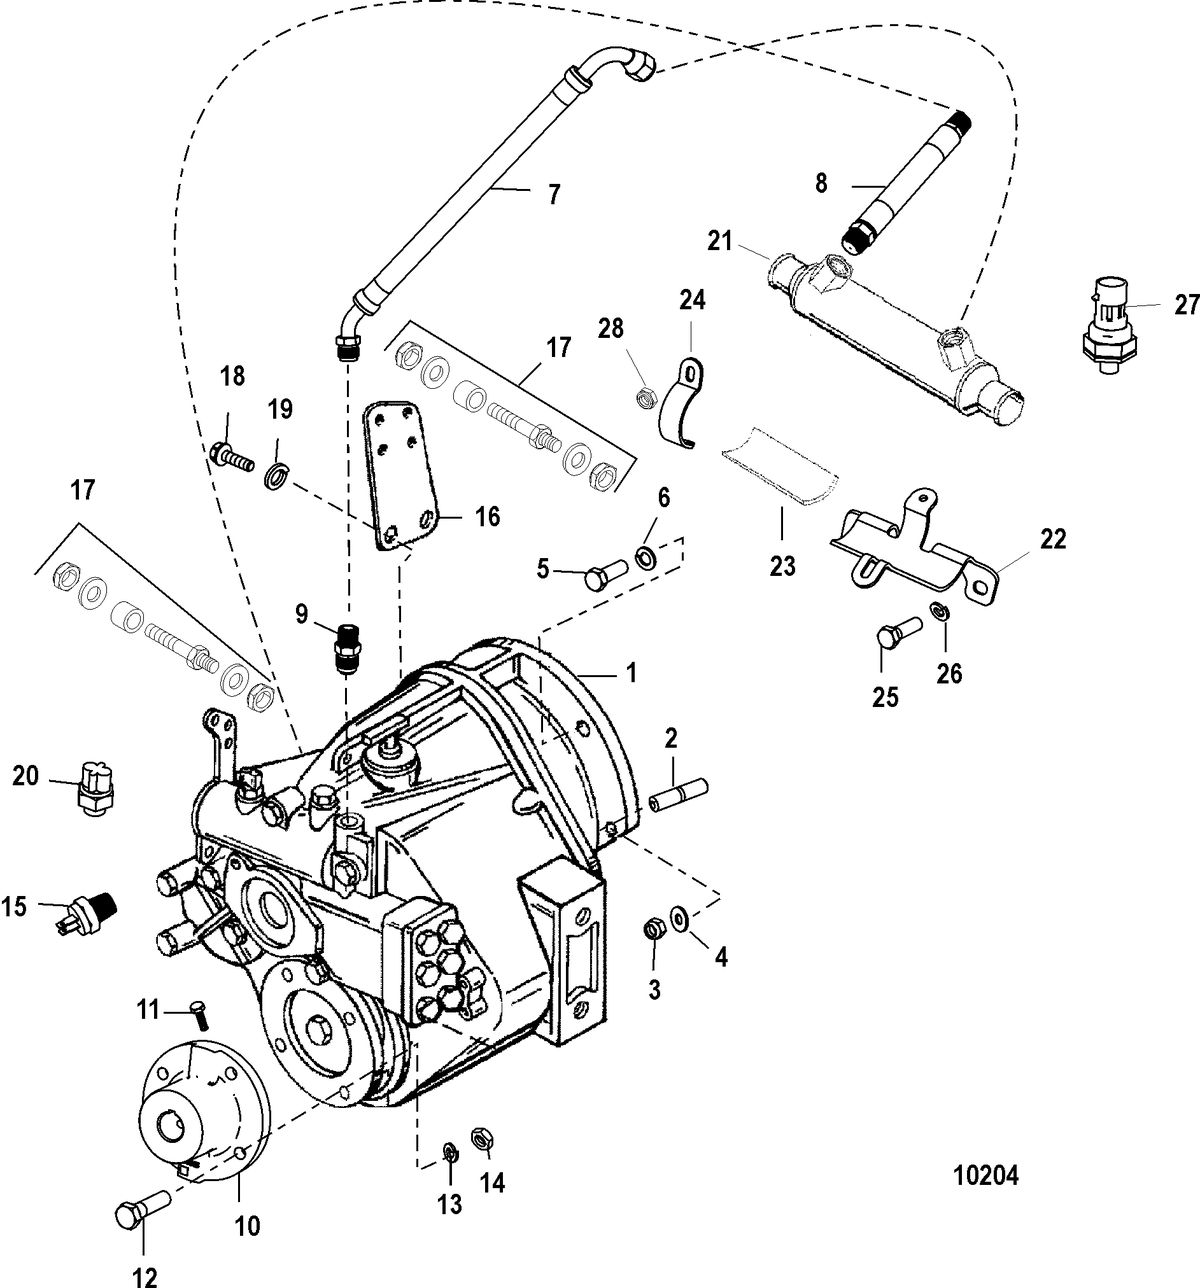 Transmission and Related Parts(BORG-WARNER 5000) | PerfProTech.com